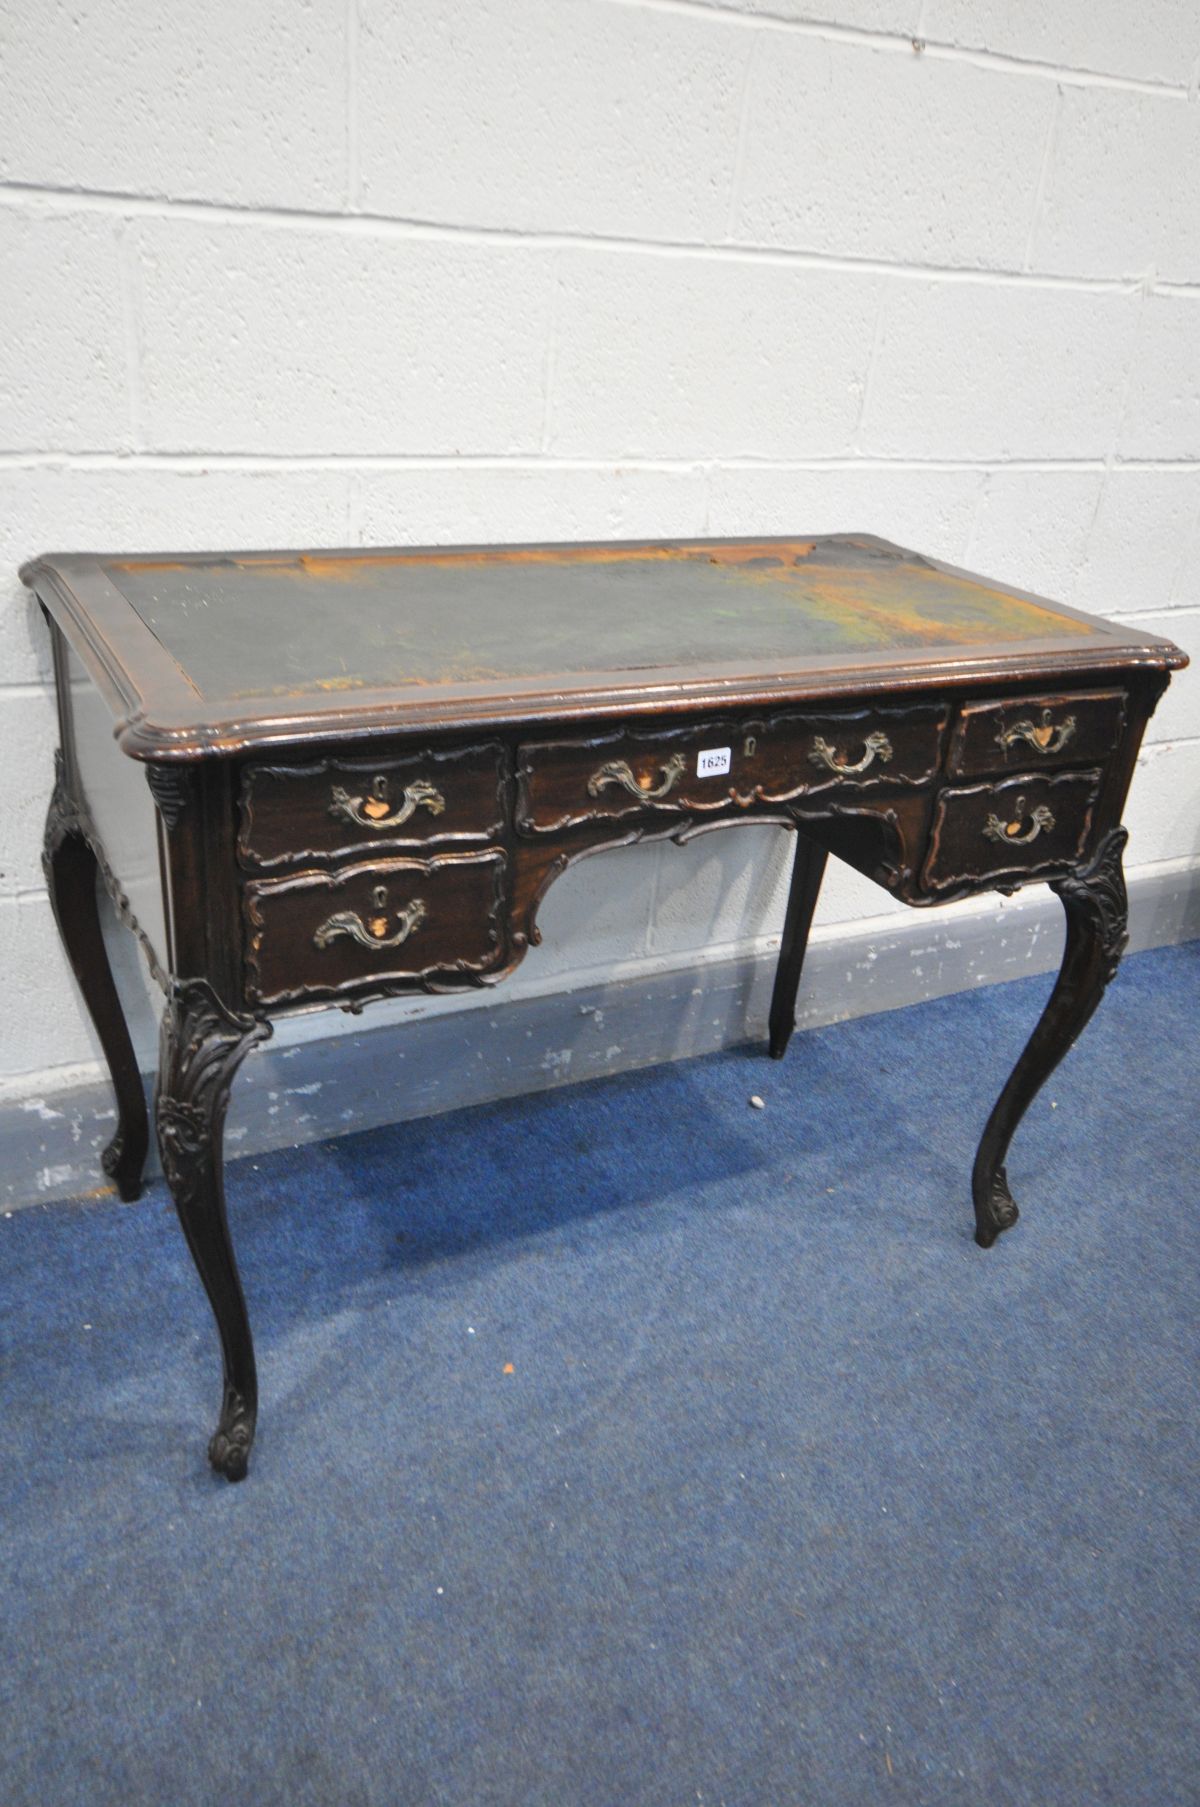 AN EARLY 20TH CENTURY FRENCH STYLE MAHOGANY LADIES DESK, with a distressed blue leather top, an - Image 2 of 4